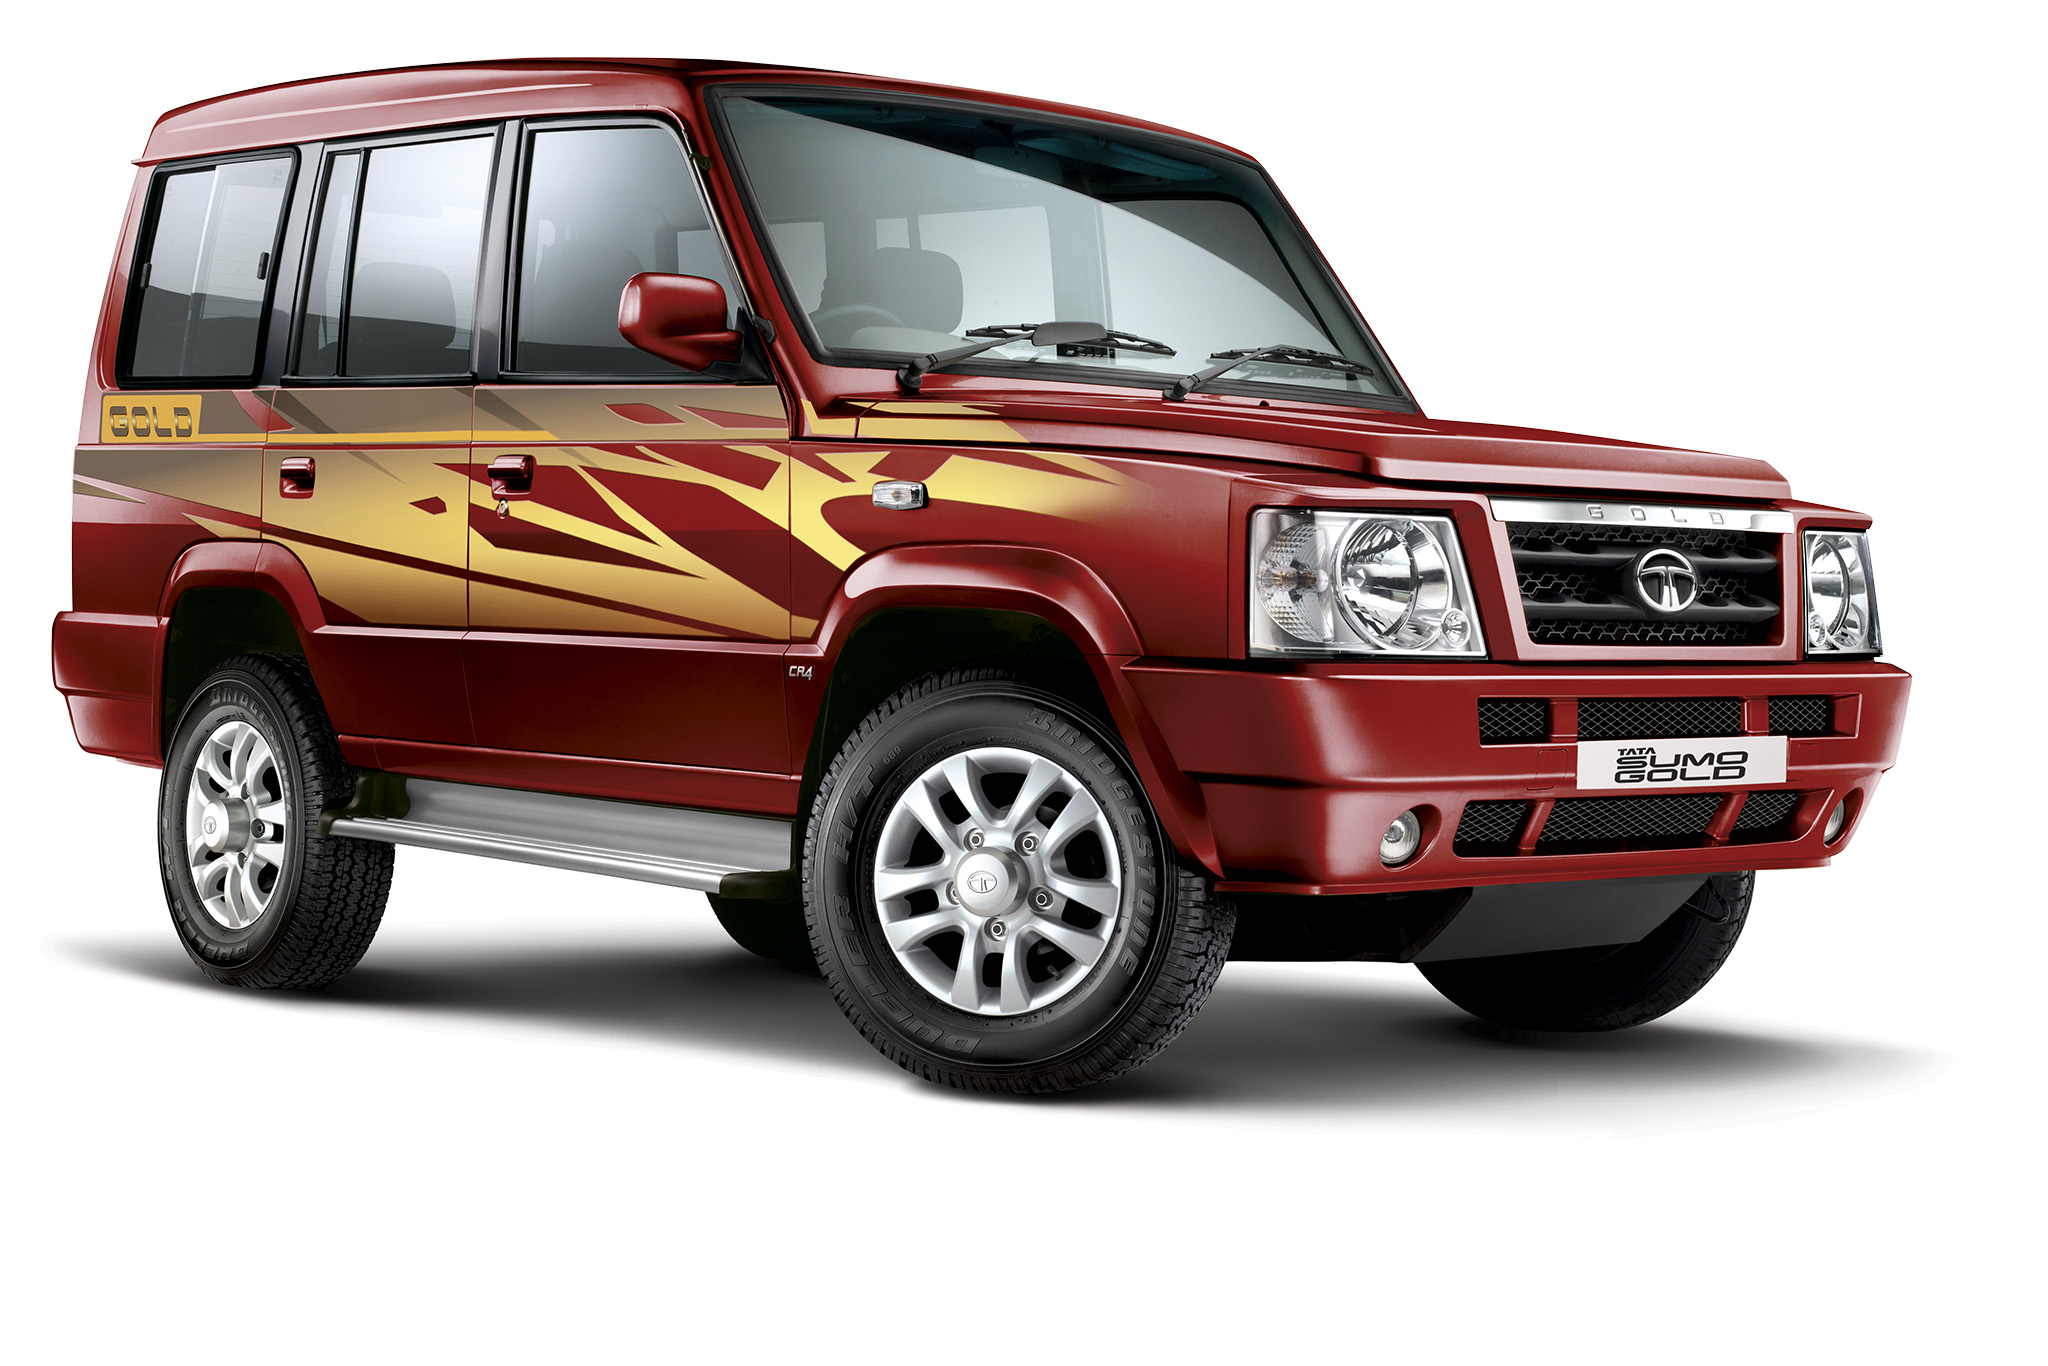 New Tata Sumo Launched at Rs 5.93 lakh